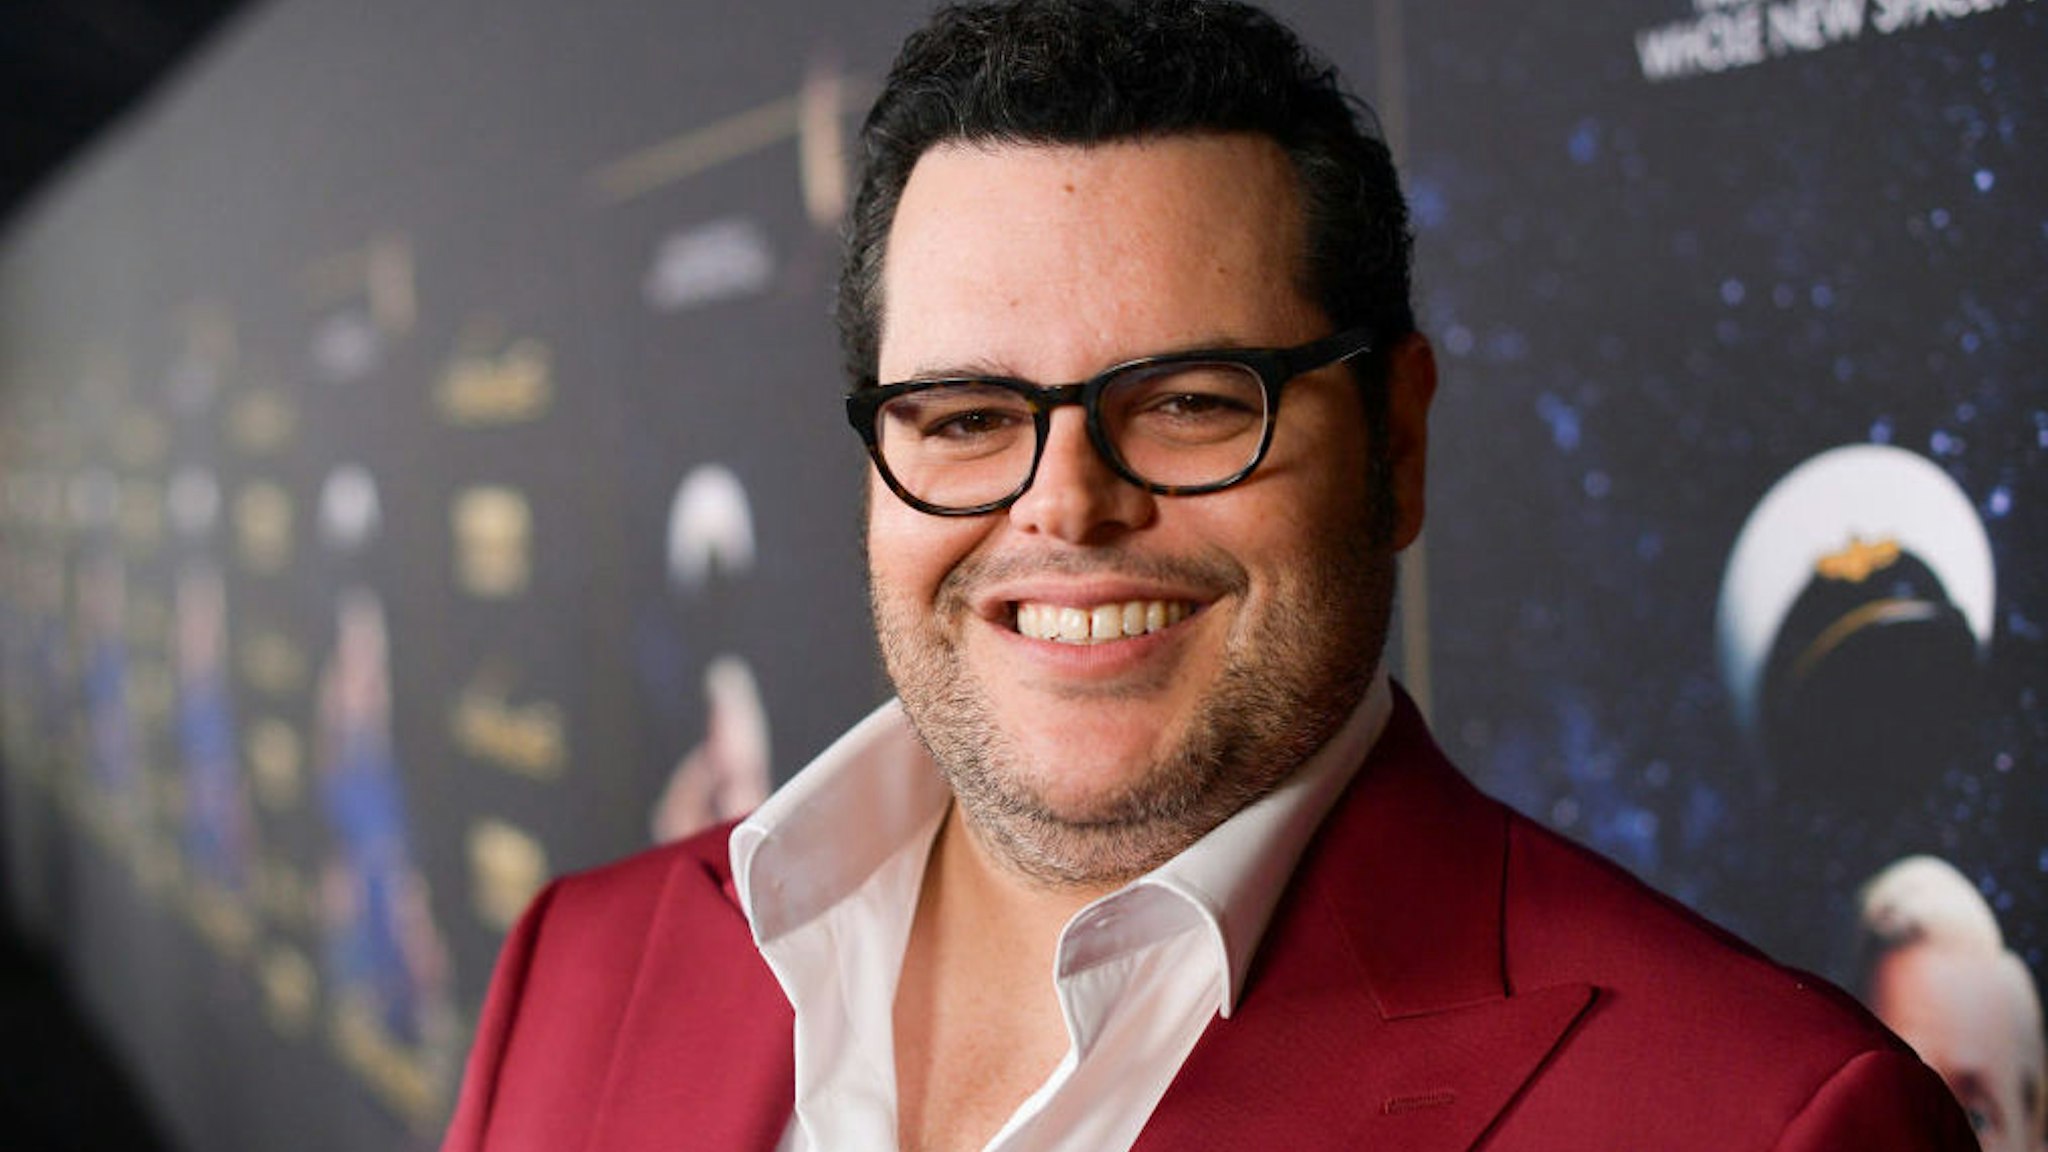 Josh Gad attends the premiere of HBO's "Avenue 5" at Avalon Theater on January 14, 2020 in Los Angeles, California.